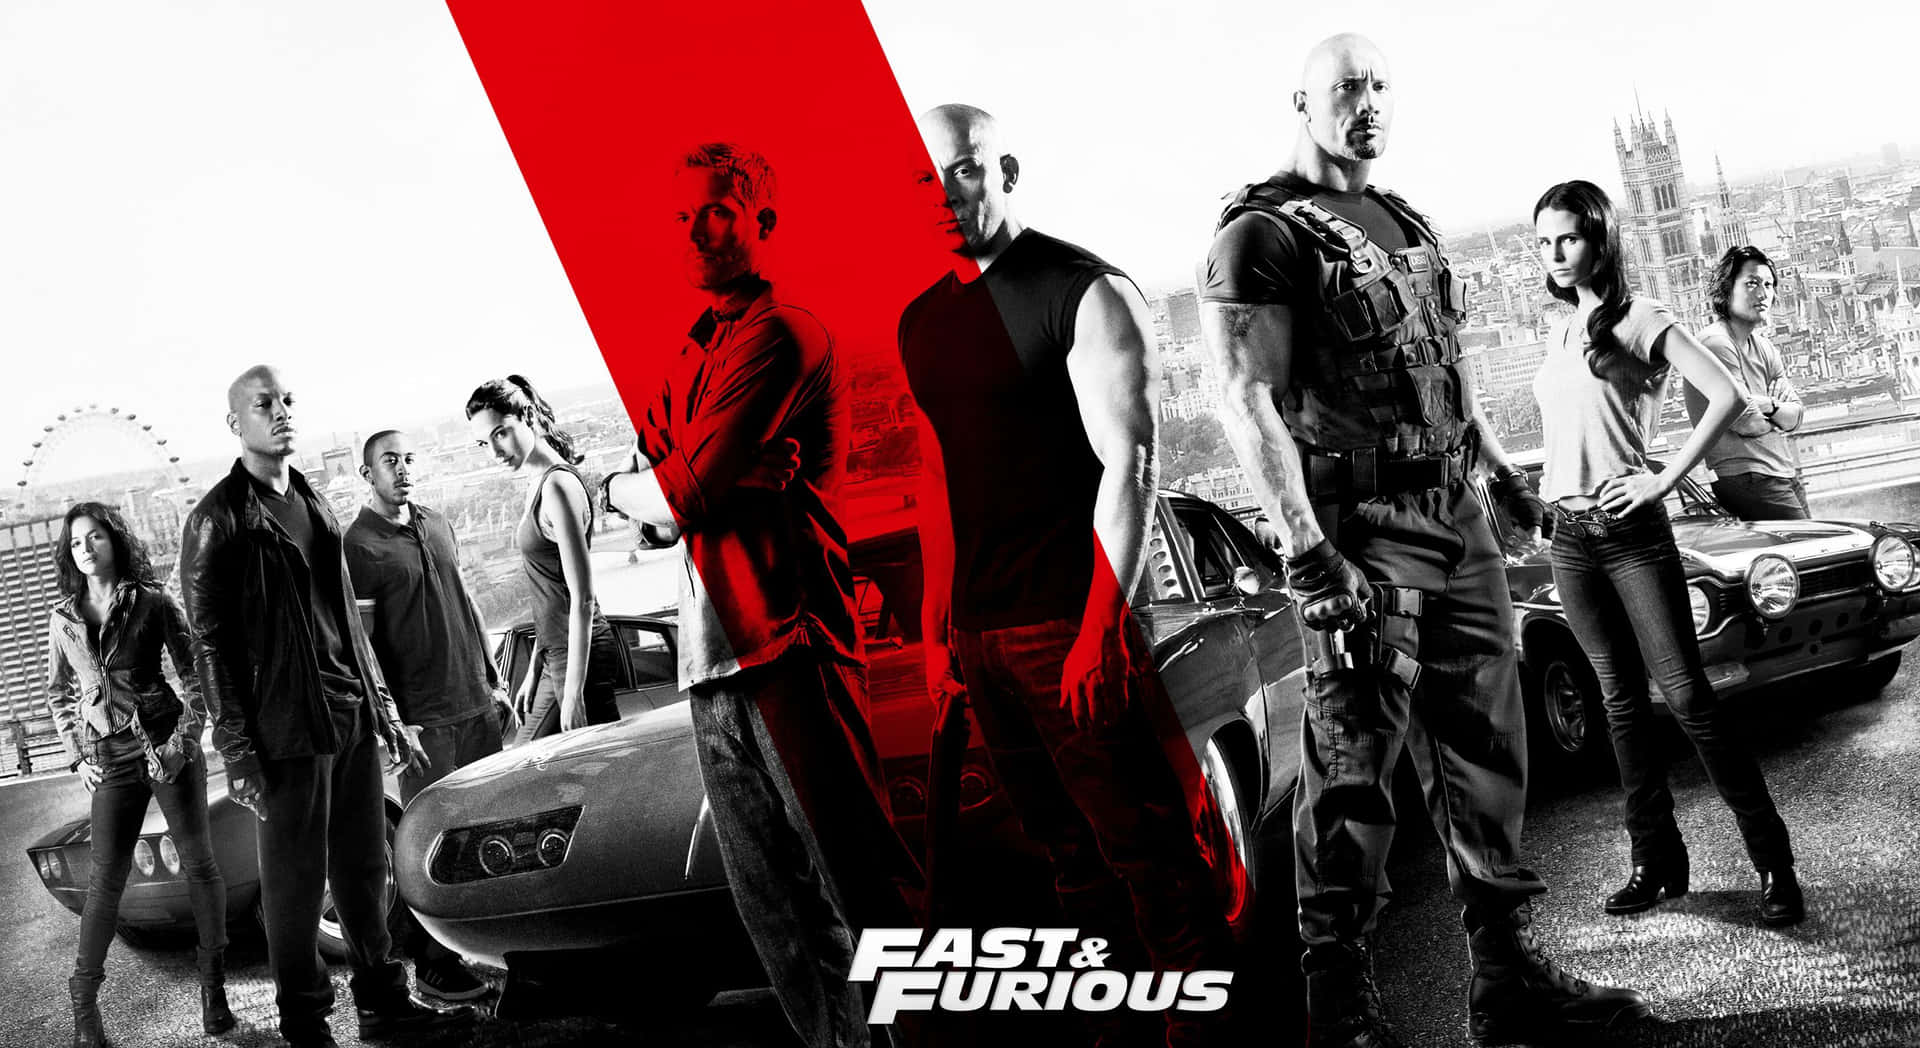 Keep Pace with the Fast and Furious Crew